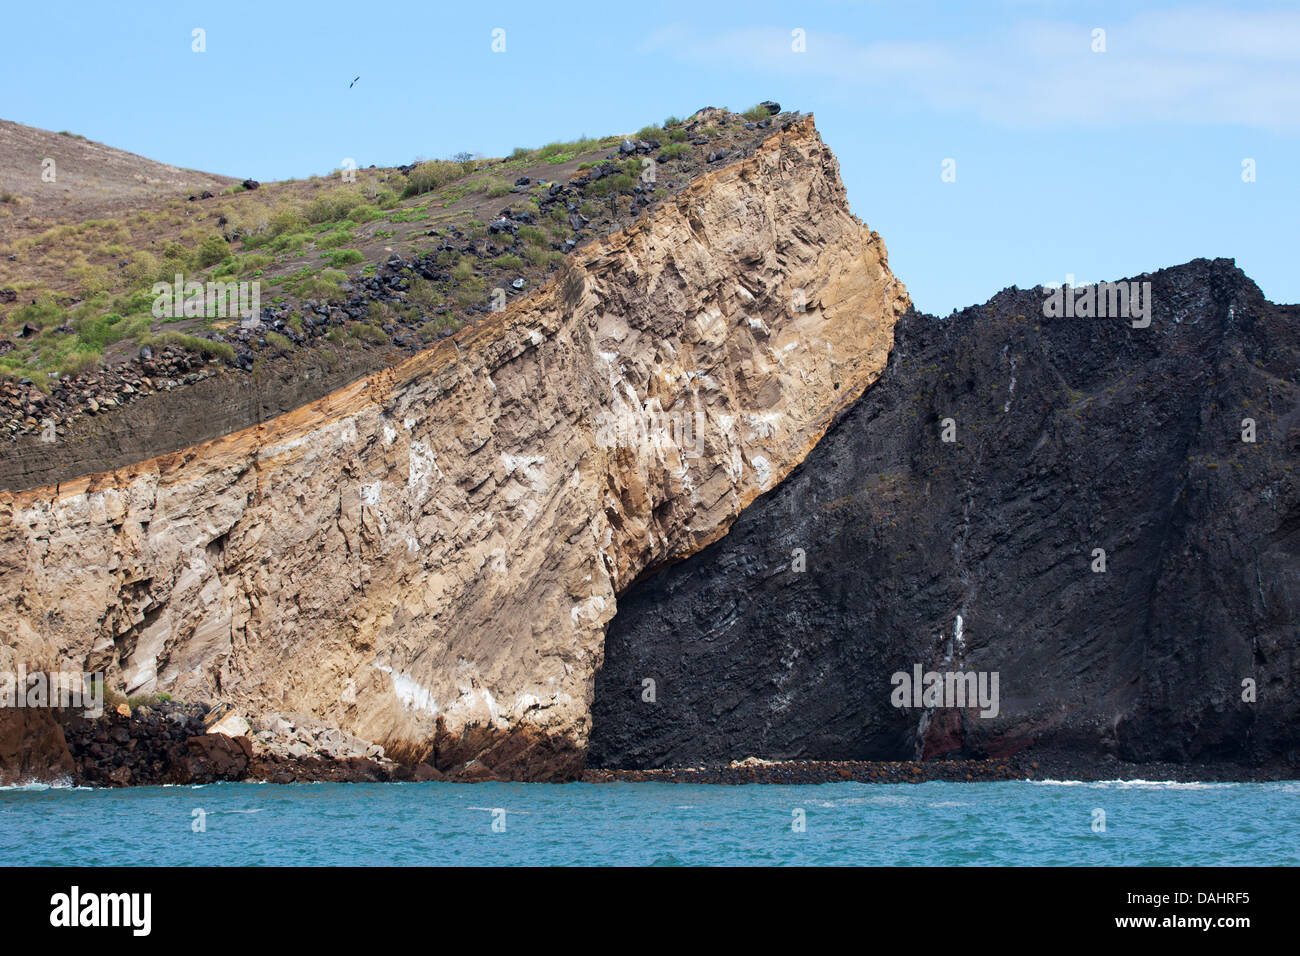 Geological contact between layers - tuff (compacted volcanic ash) on the left and the darker scoria (cinder) formation on a volcano in the Galapagos Stock Photo